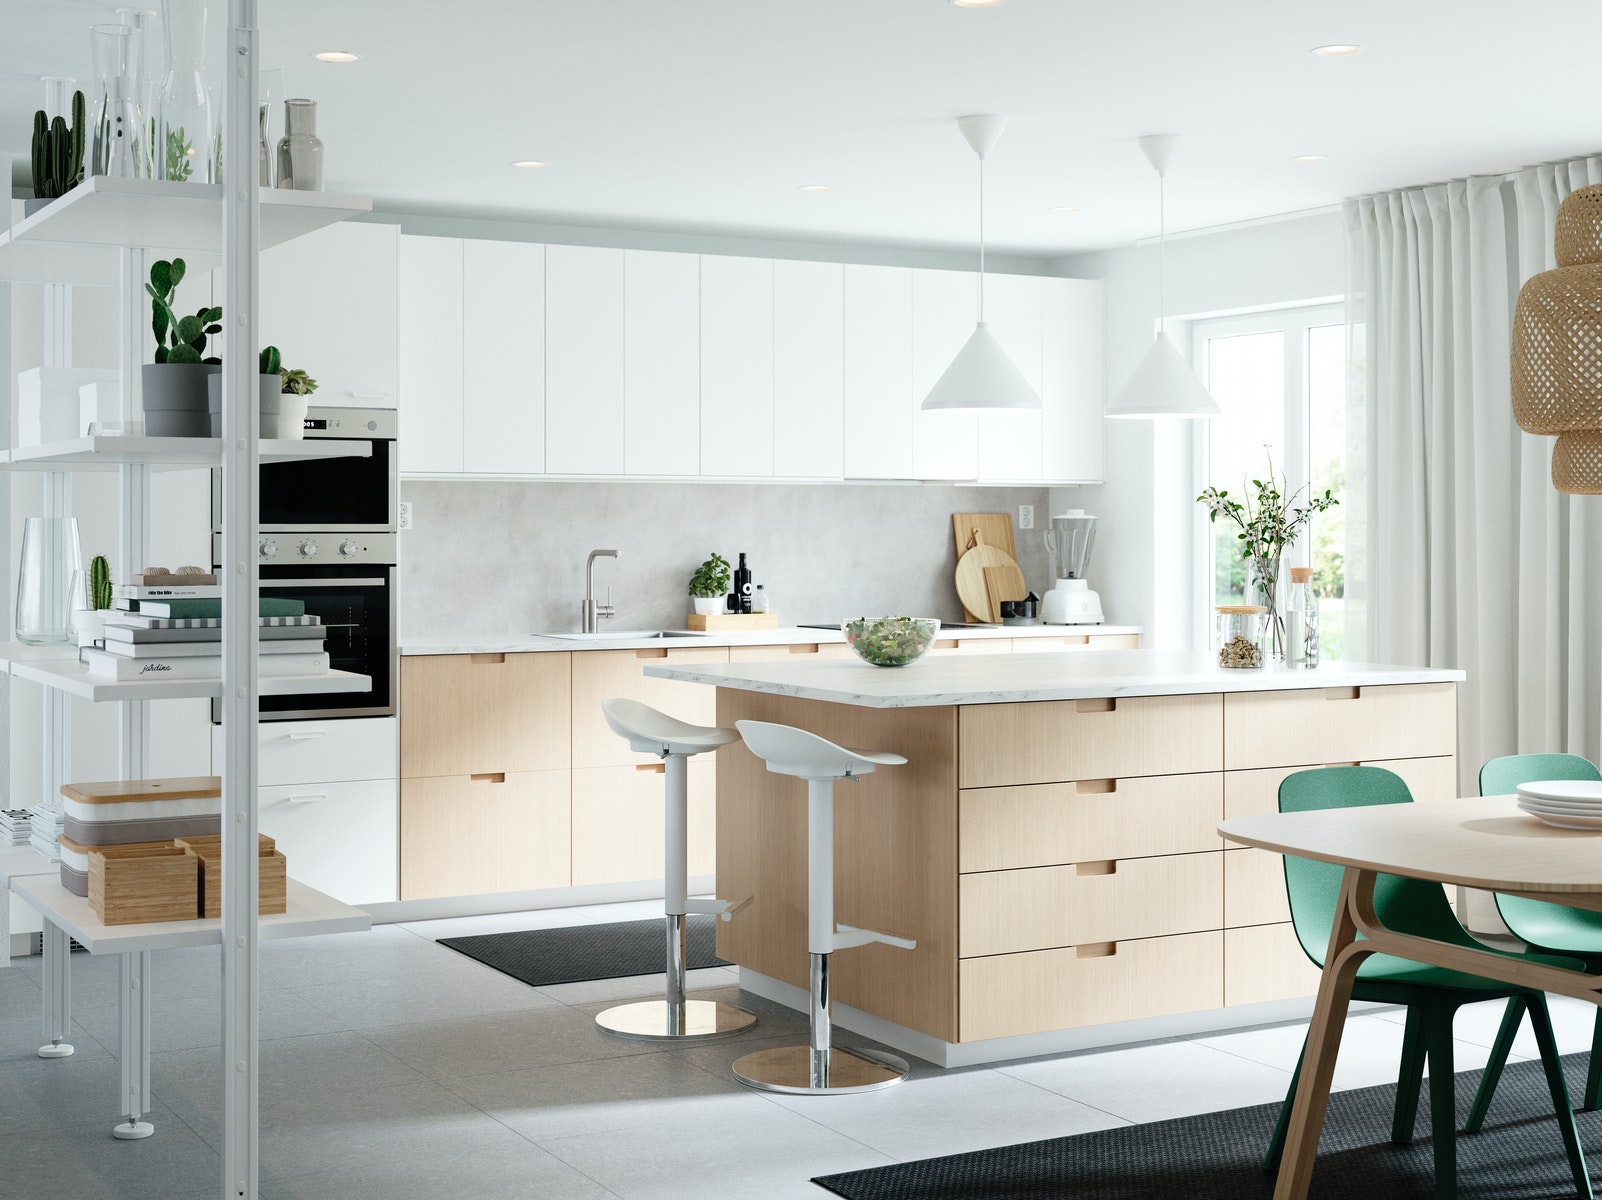 IKEA - A sustainable kitchen for a planet-friendly lifestyle